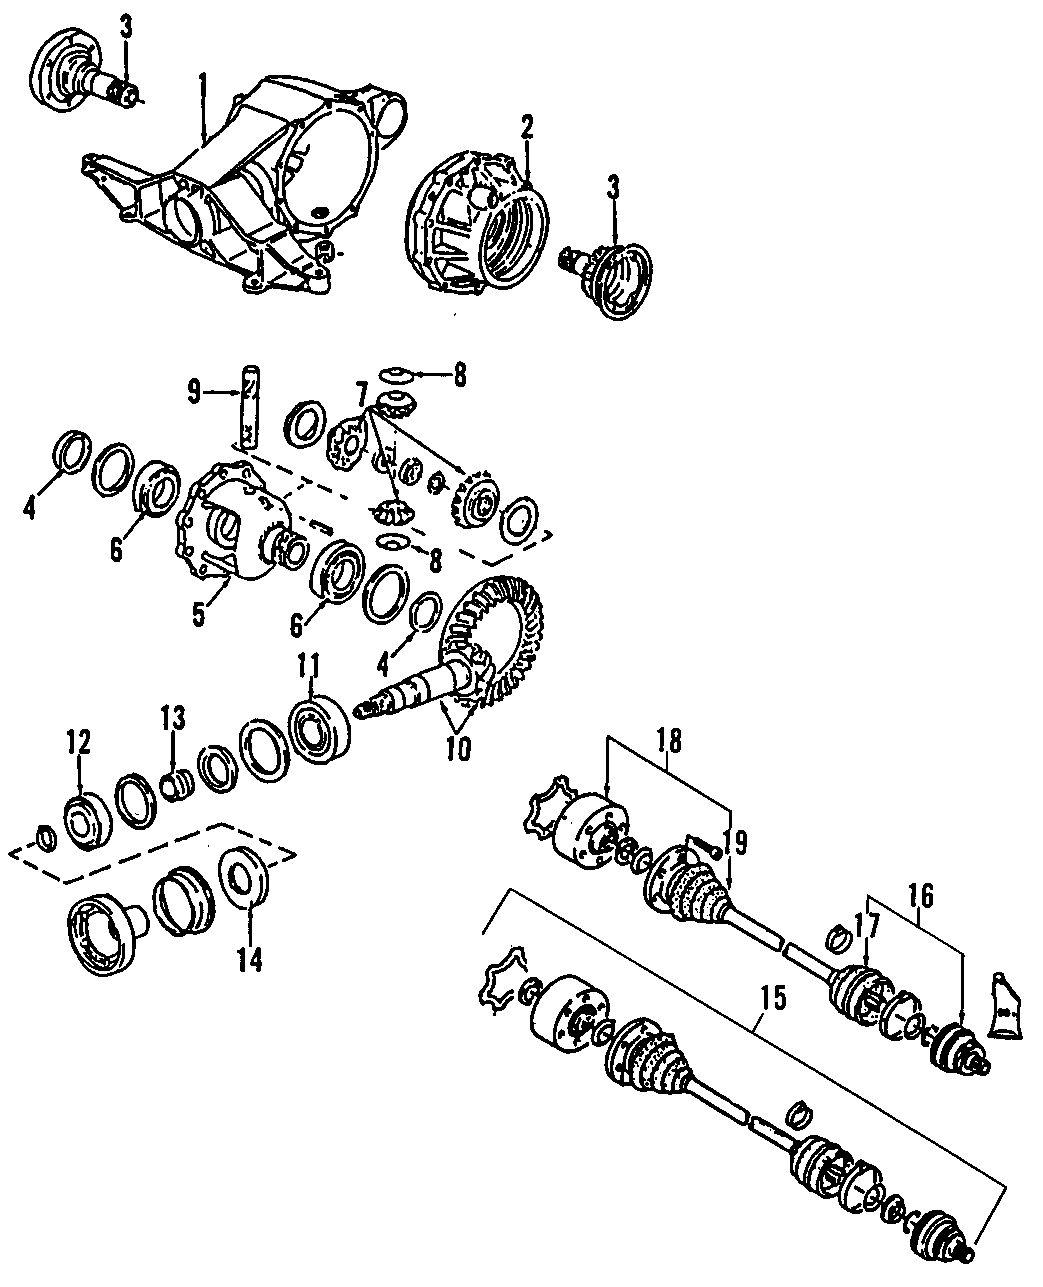 3DRIVE AXLES. REAR AXLE. AXLE SHAFTS & JOINTS. DIFFERENTIAL. PROPELLER SHAFT.https://images.simplepart.com/images/parts/motor/fullsize/F220090.png